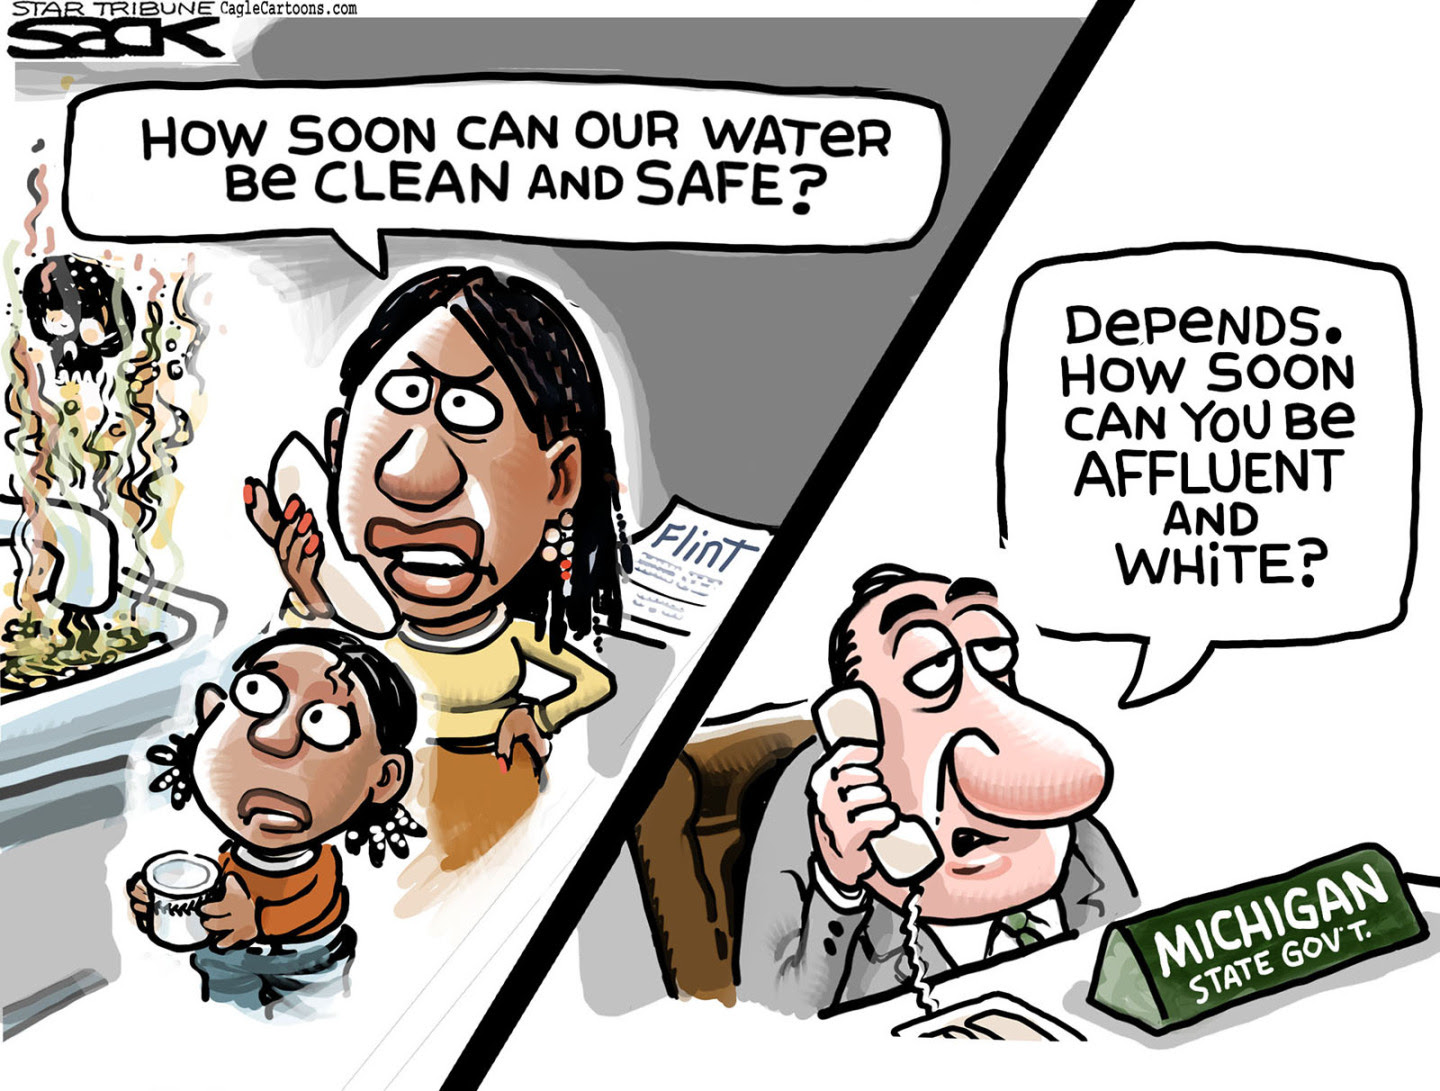 Republican mis management created lead contaminated water supplies.